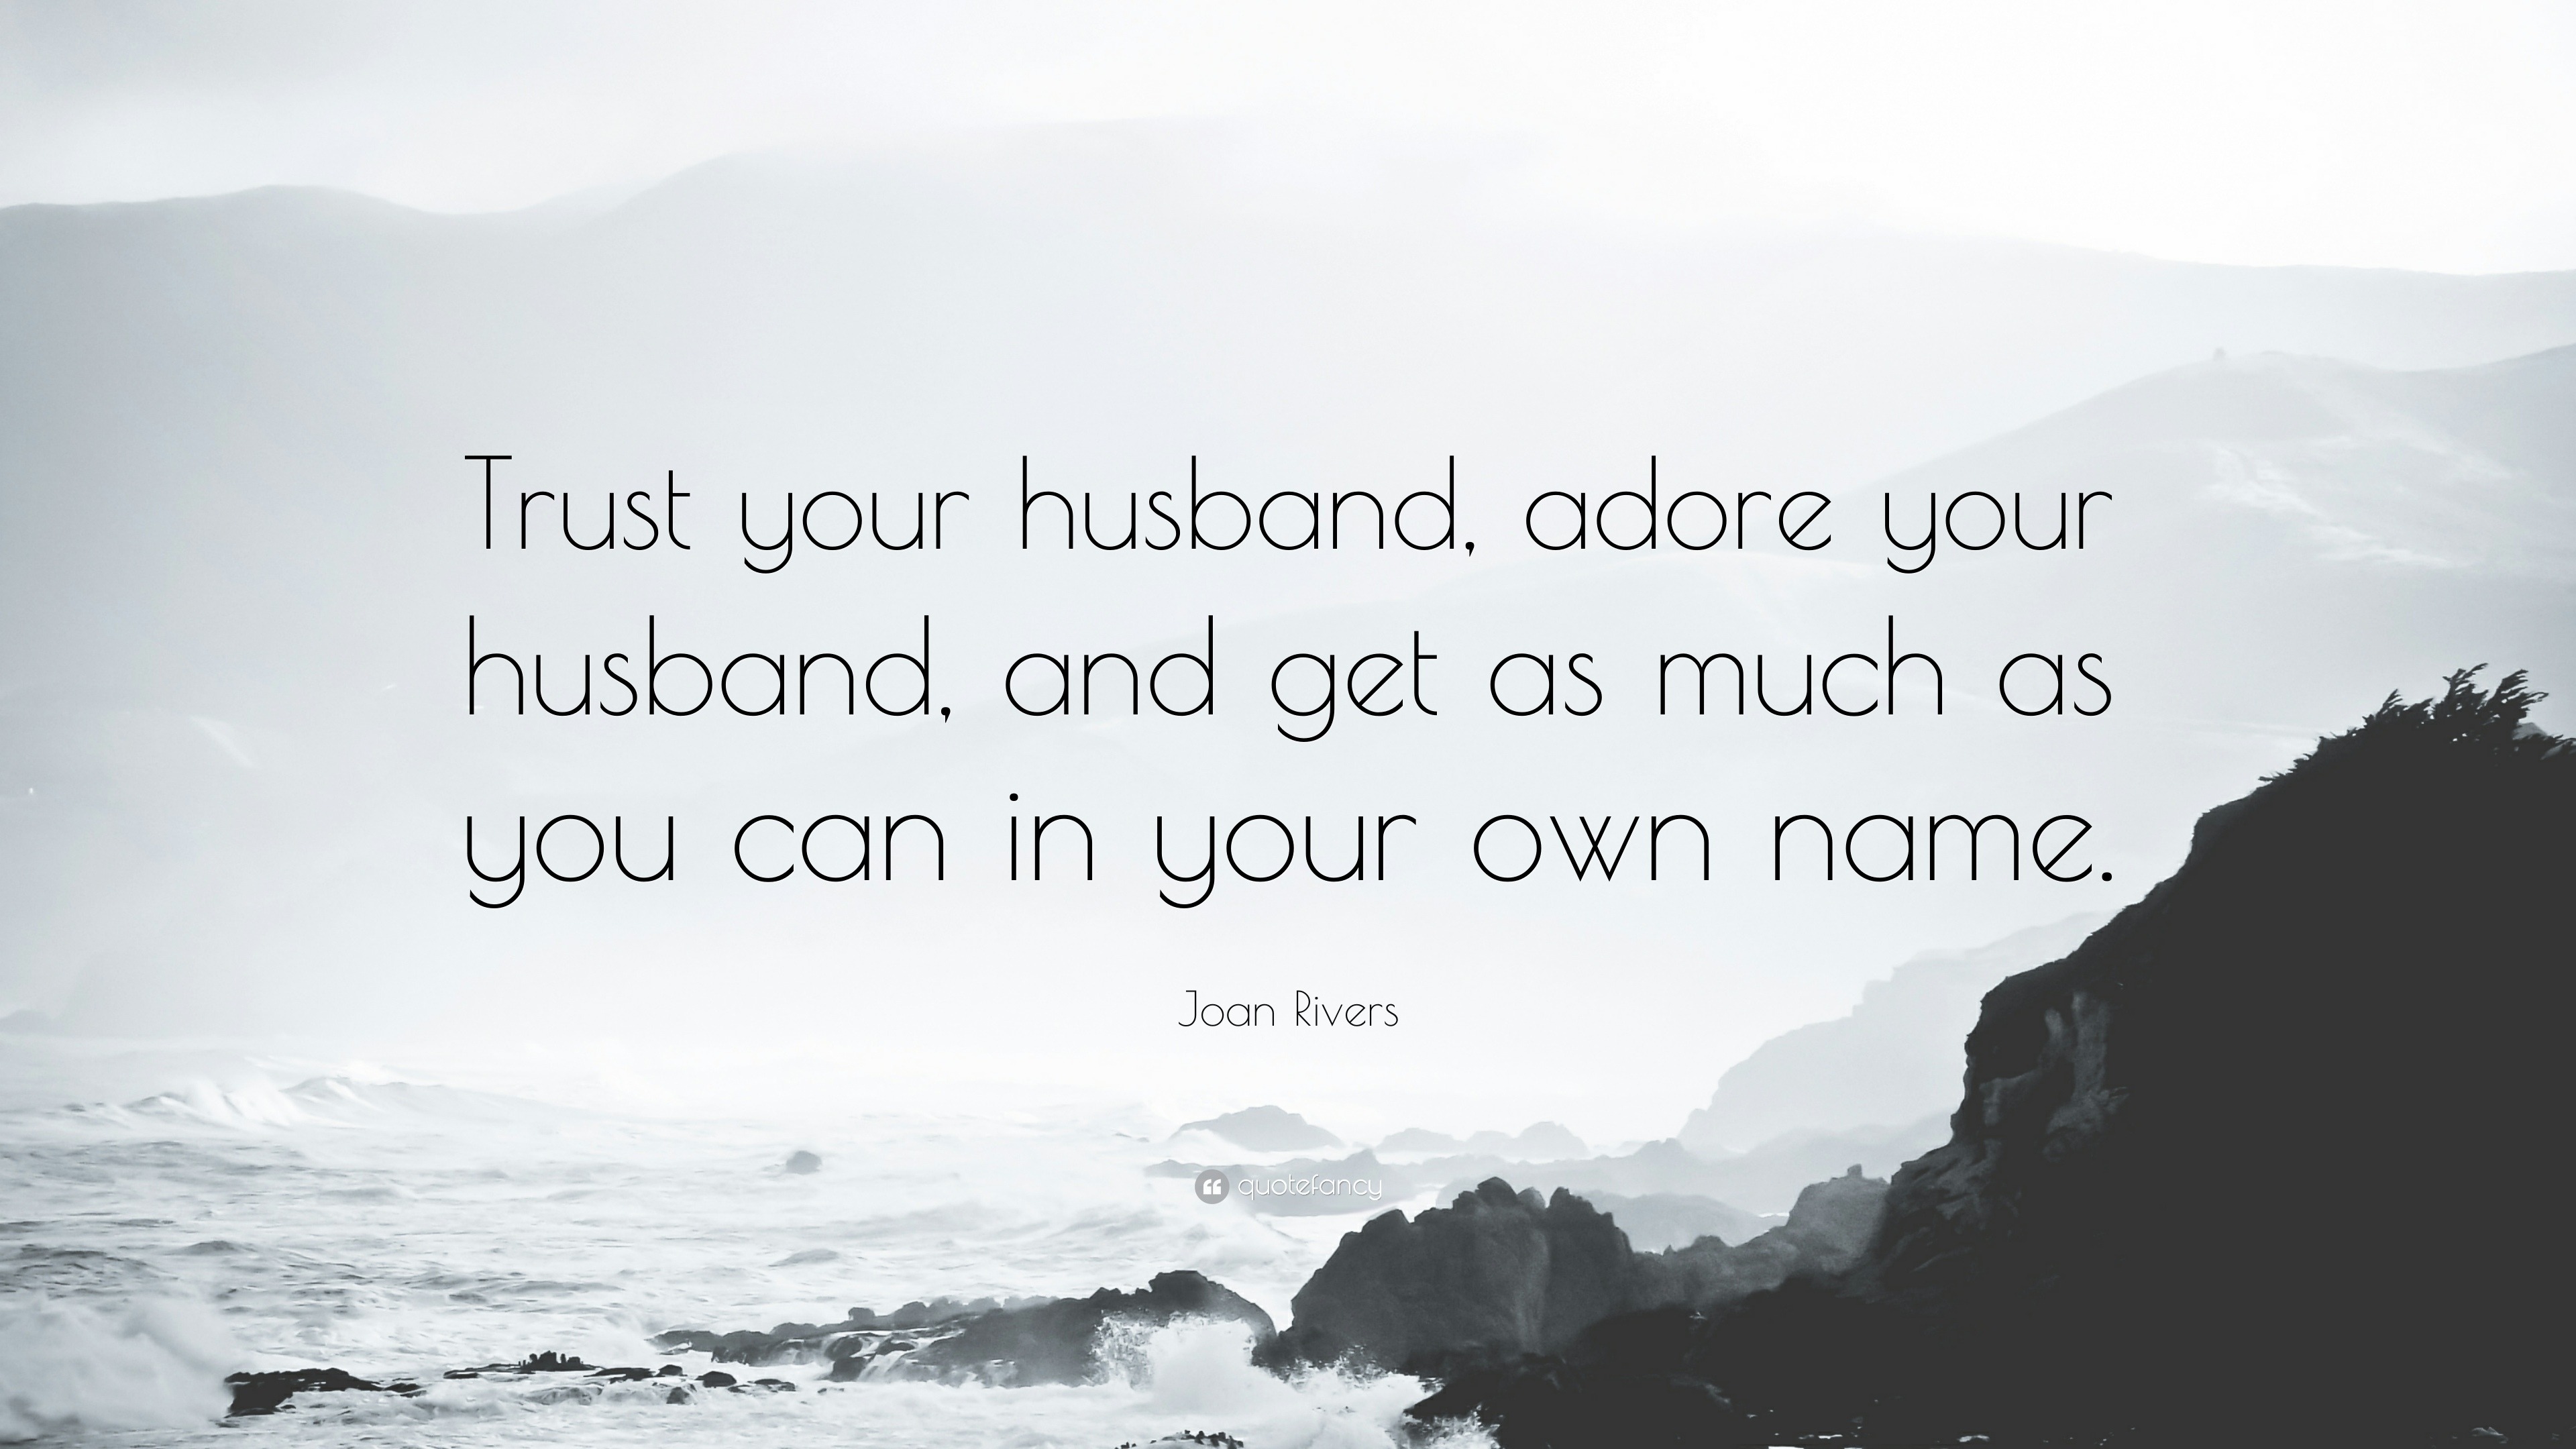 Joan Rivers Quote: “Trust your husband, adore your husband, and